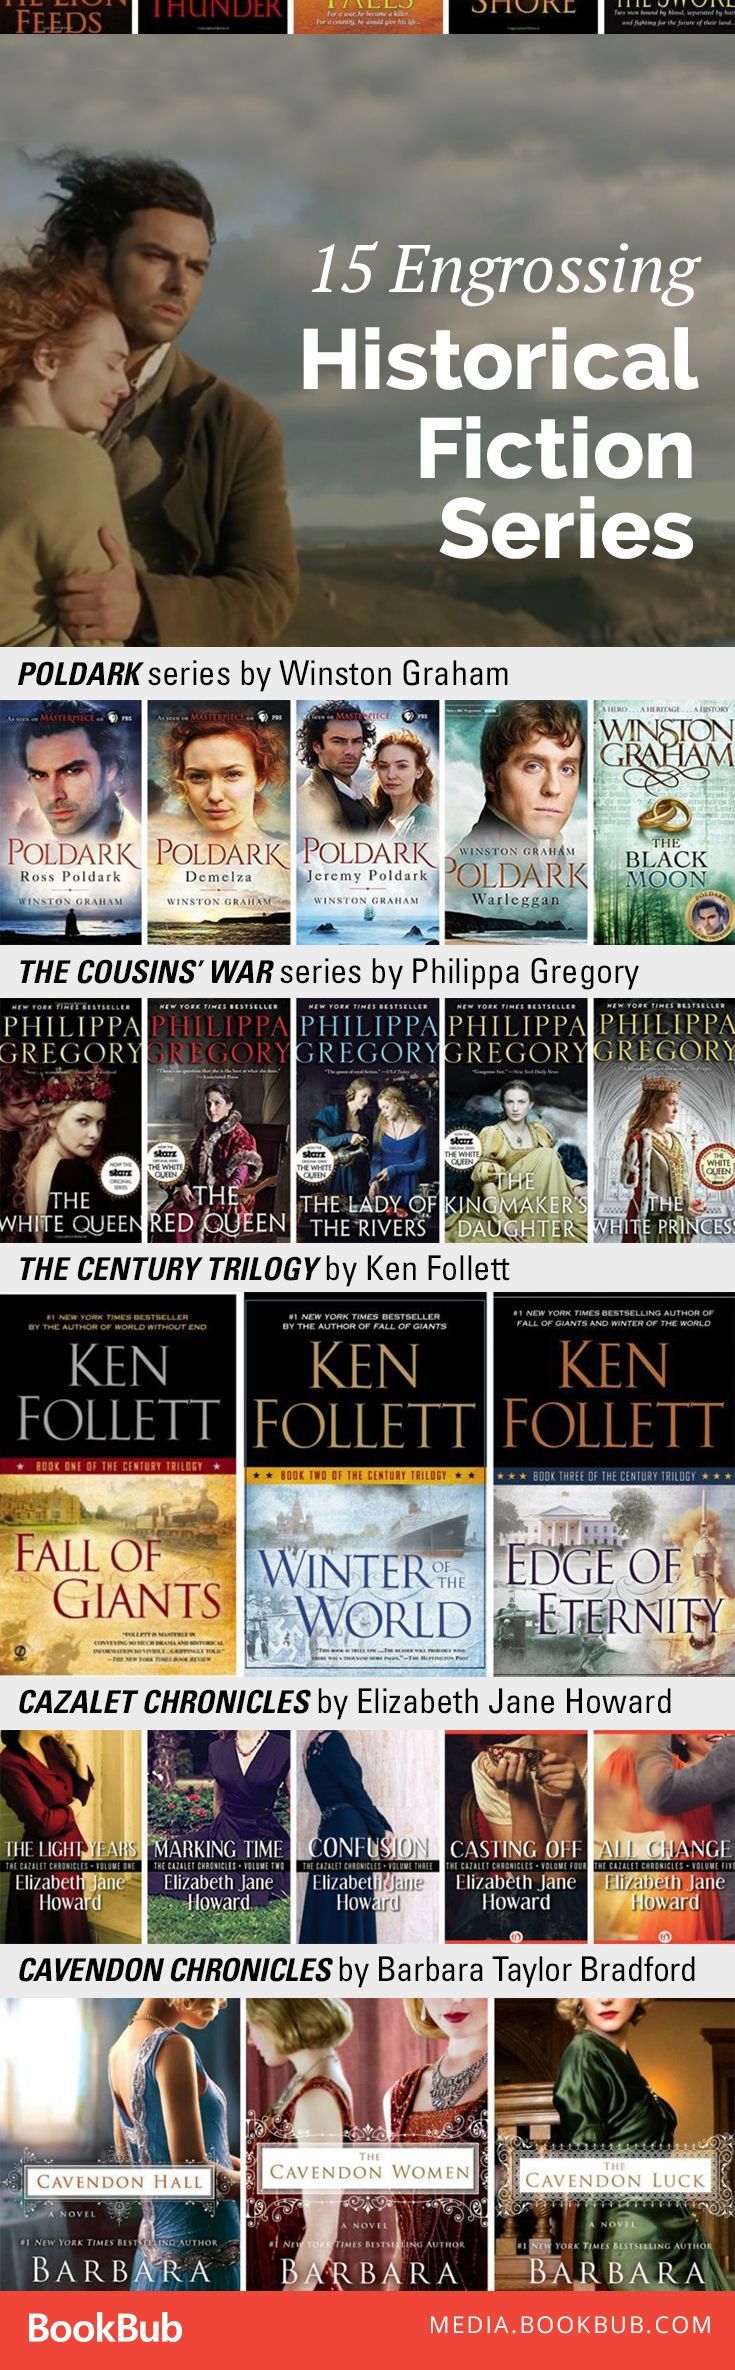 These great historical fiction books will transport you through the centuries from 14th-century Norway to the American Revolution